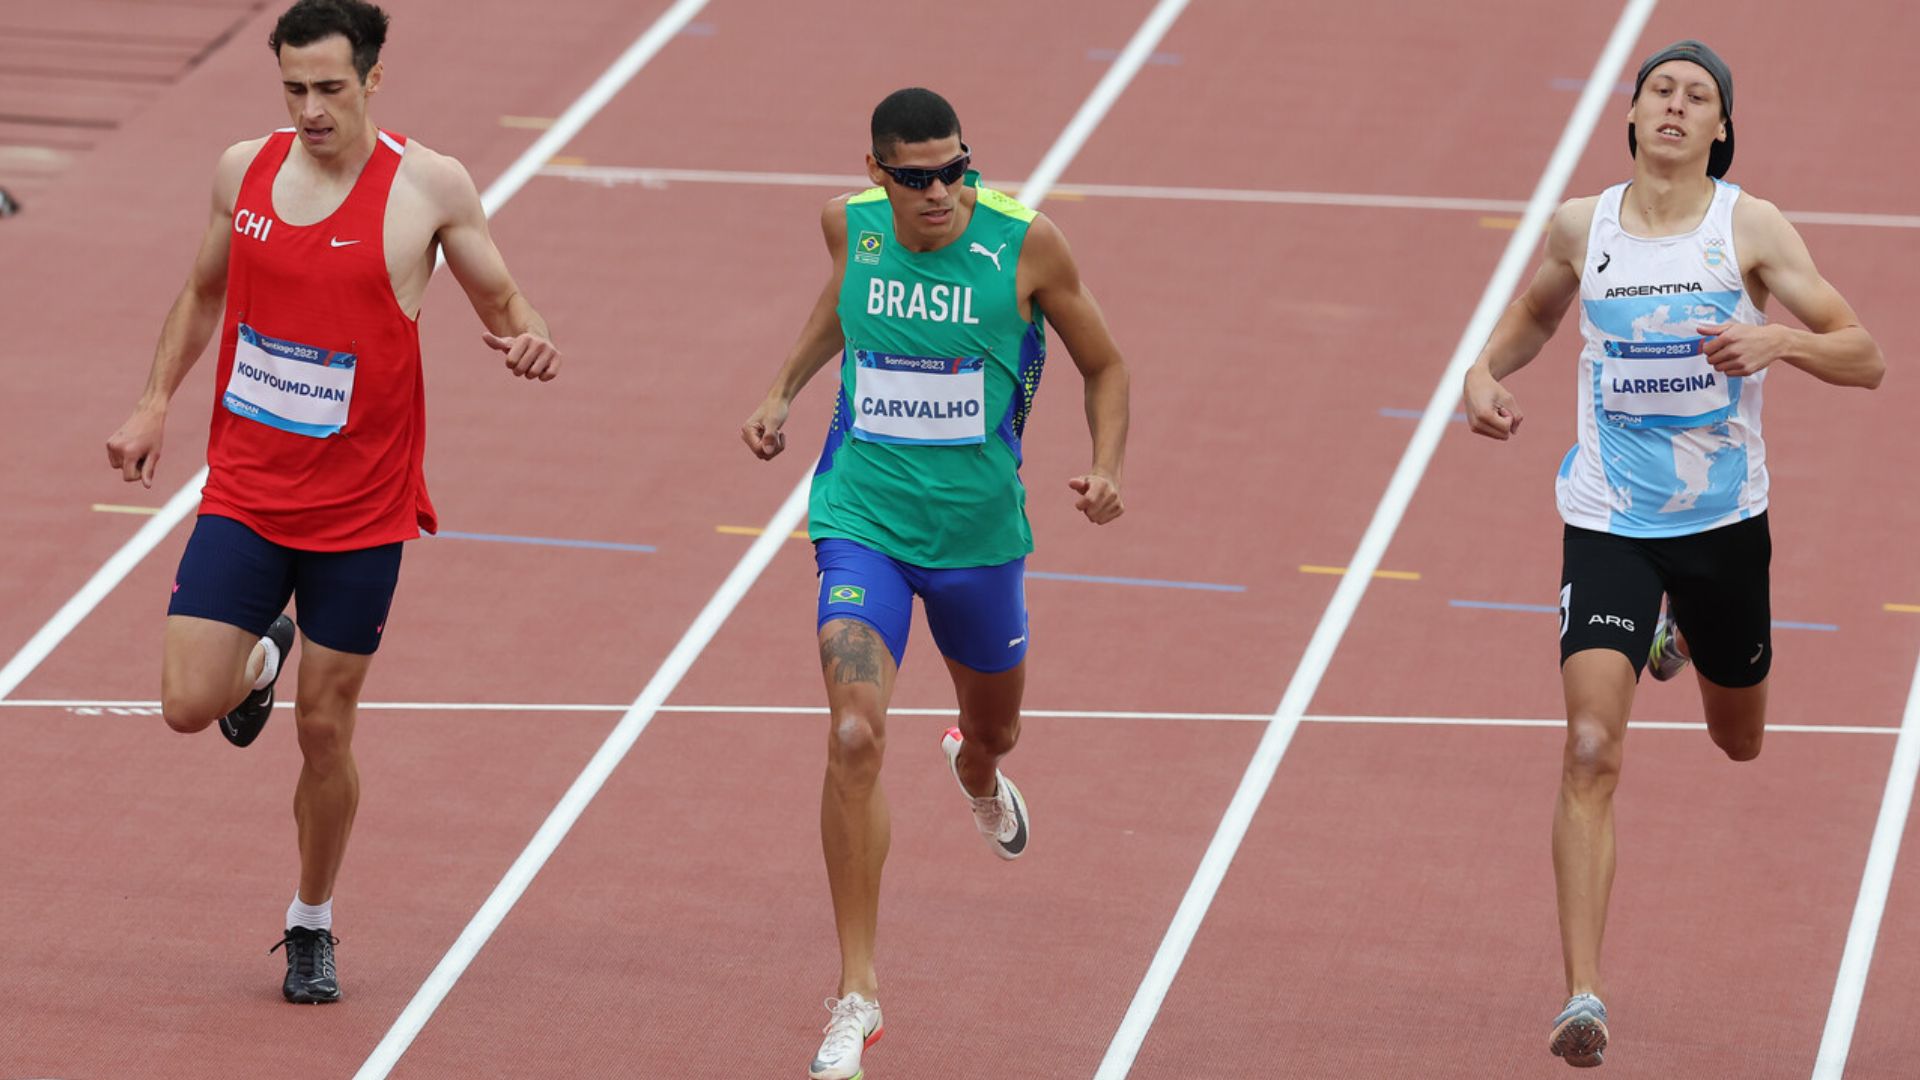 Athletics: Chilean Martín Kouyoumdian will compete for a medal in the 400 meters